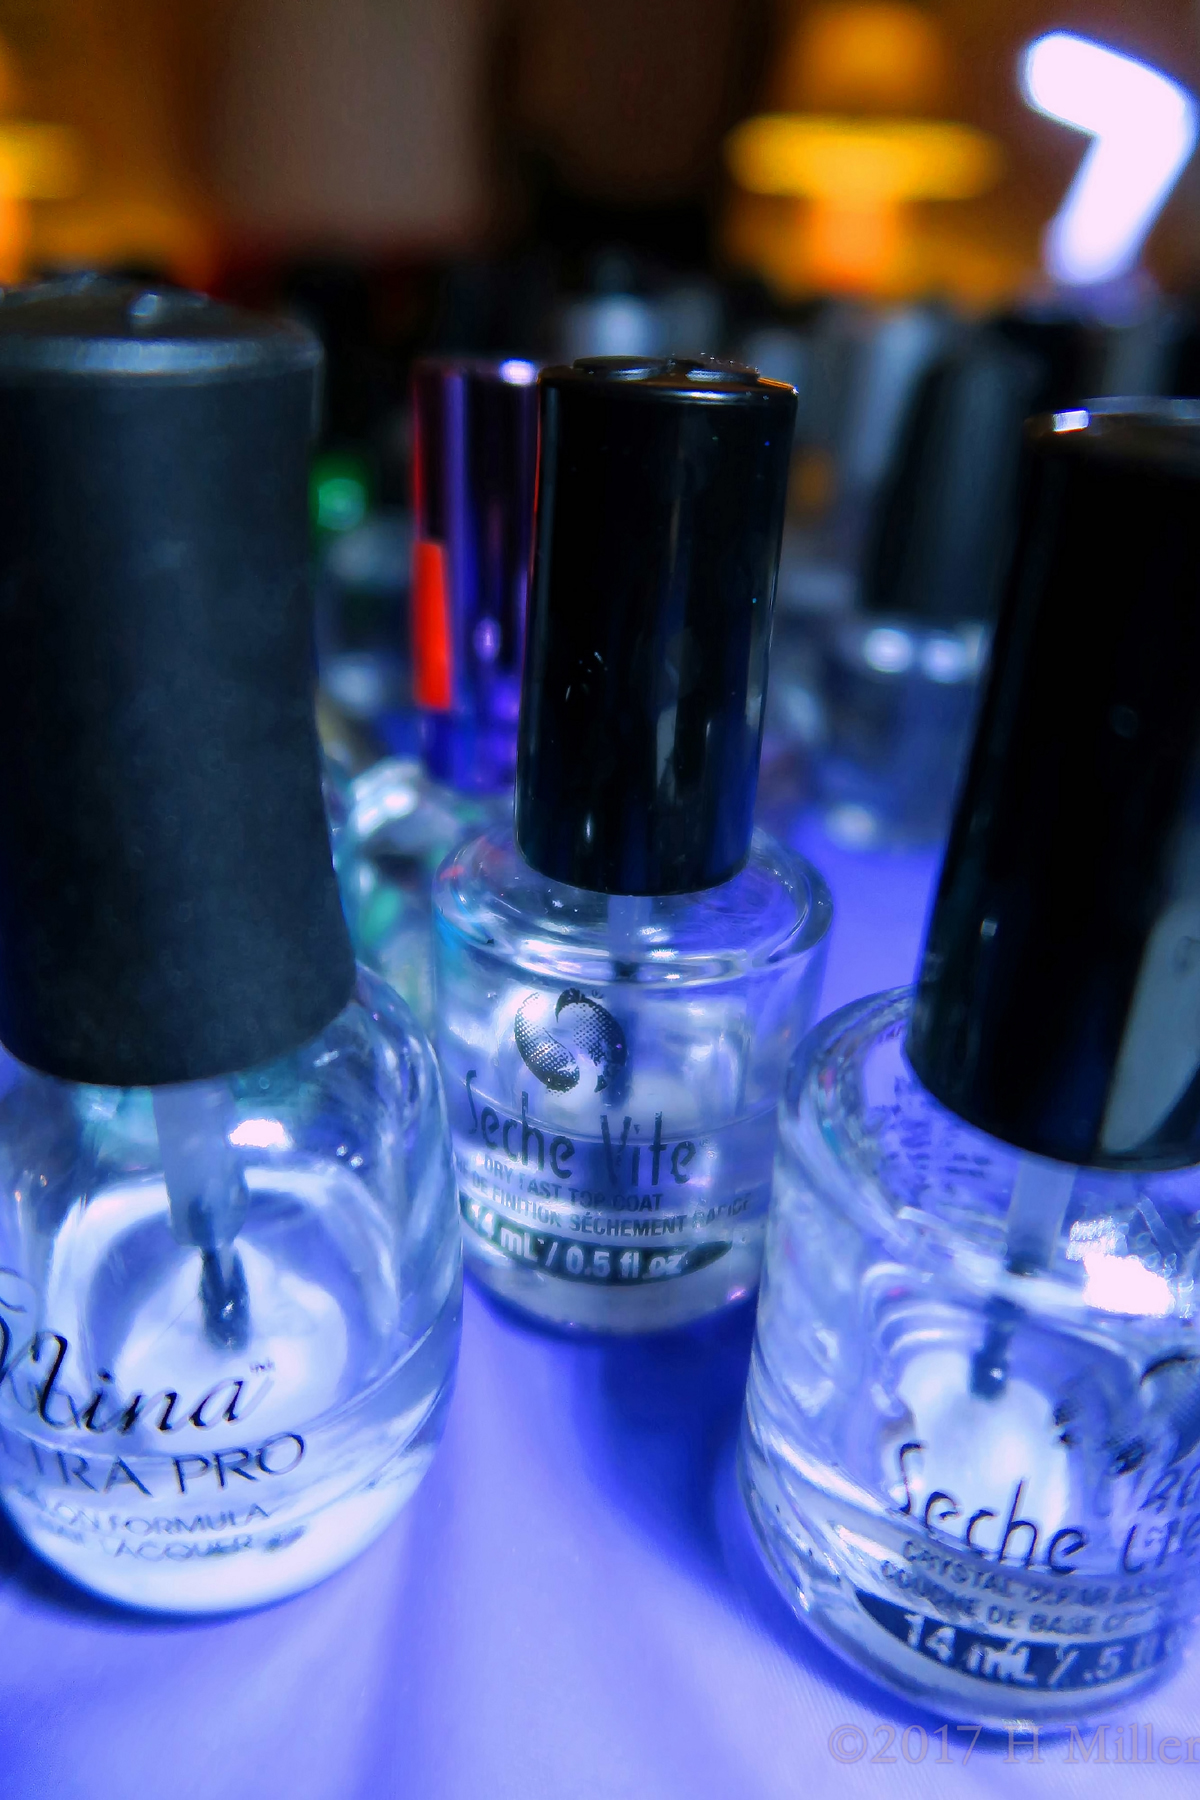 Clear Base Coats Are Super Important For Long Lasting Kids Manicures. 